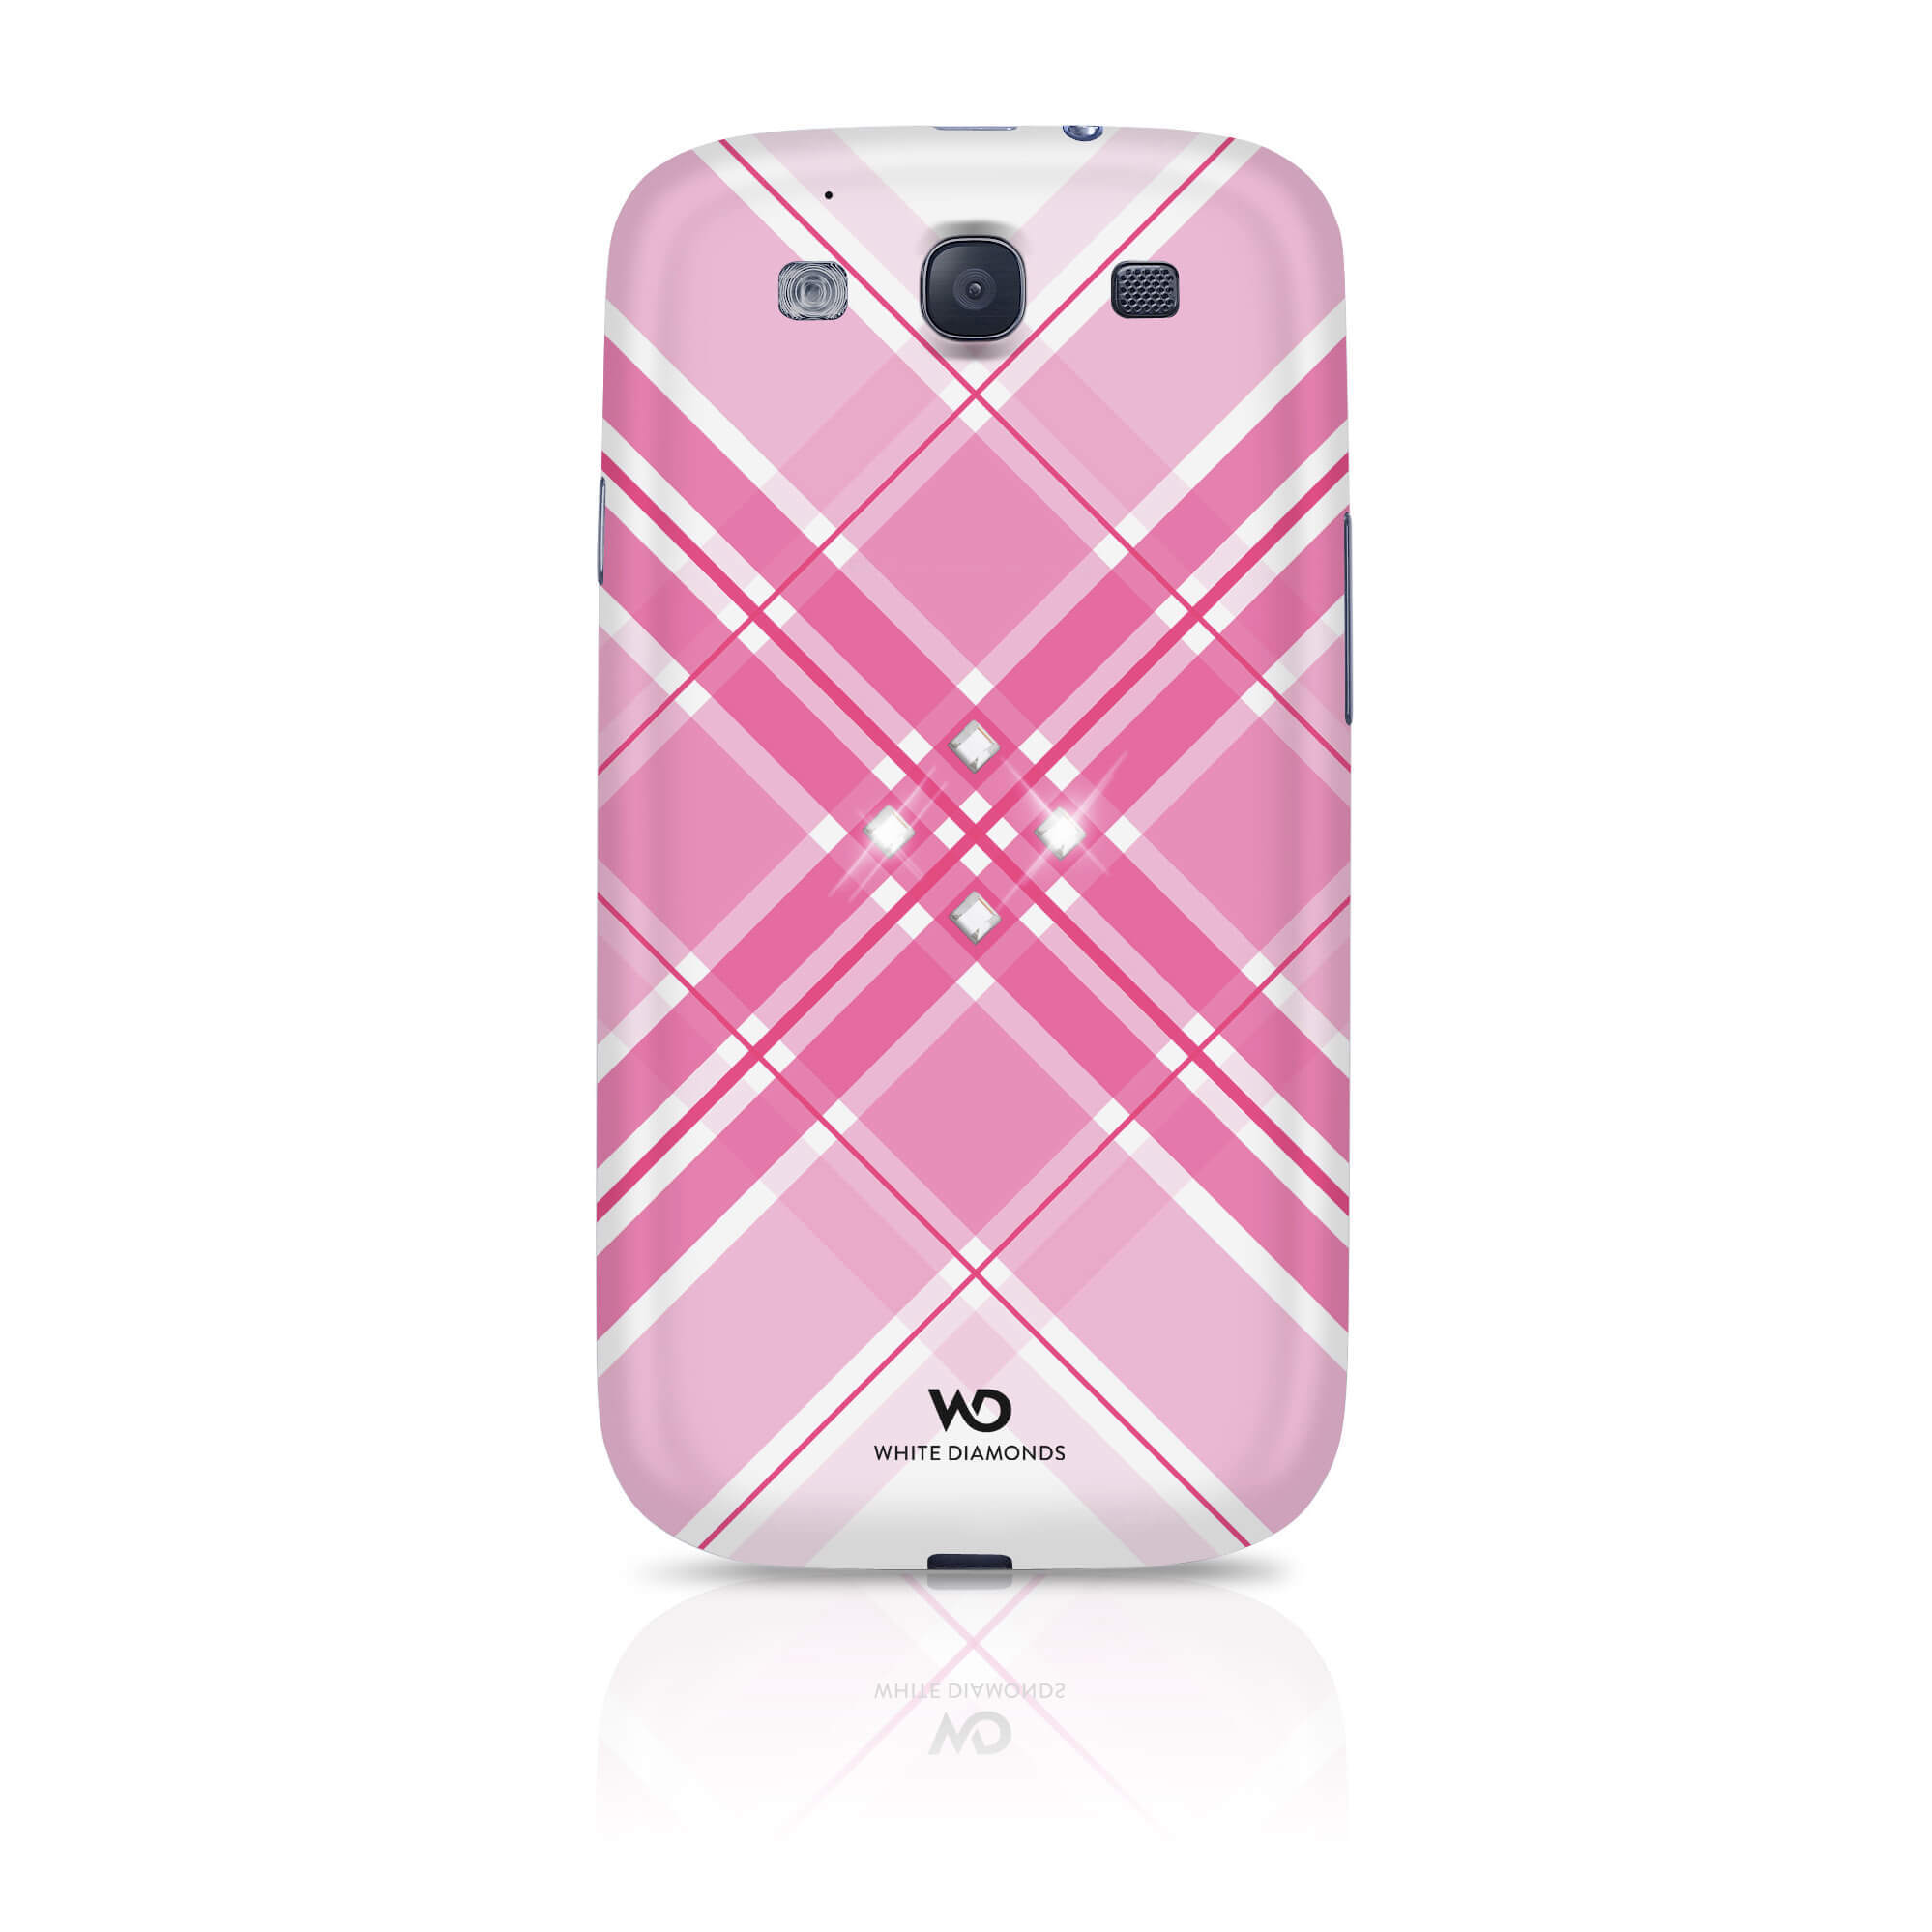 Grid Mobile Phone Cover for S amsung Galaxy S III, pink